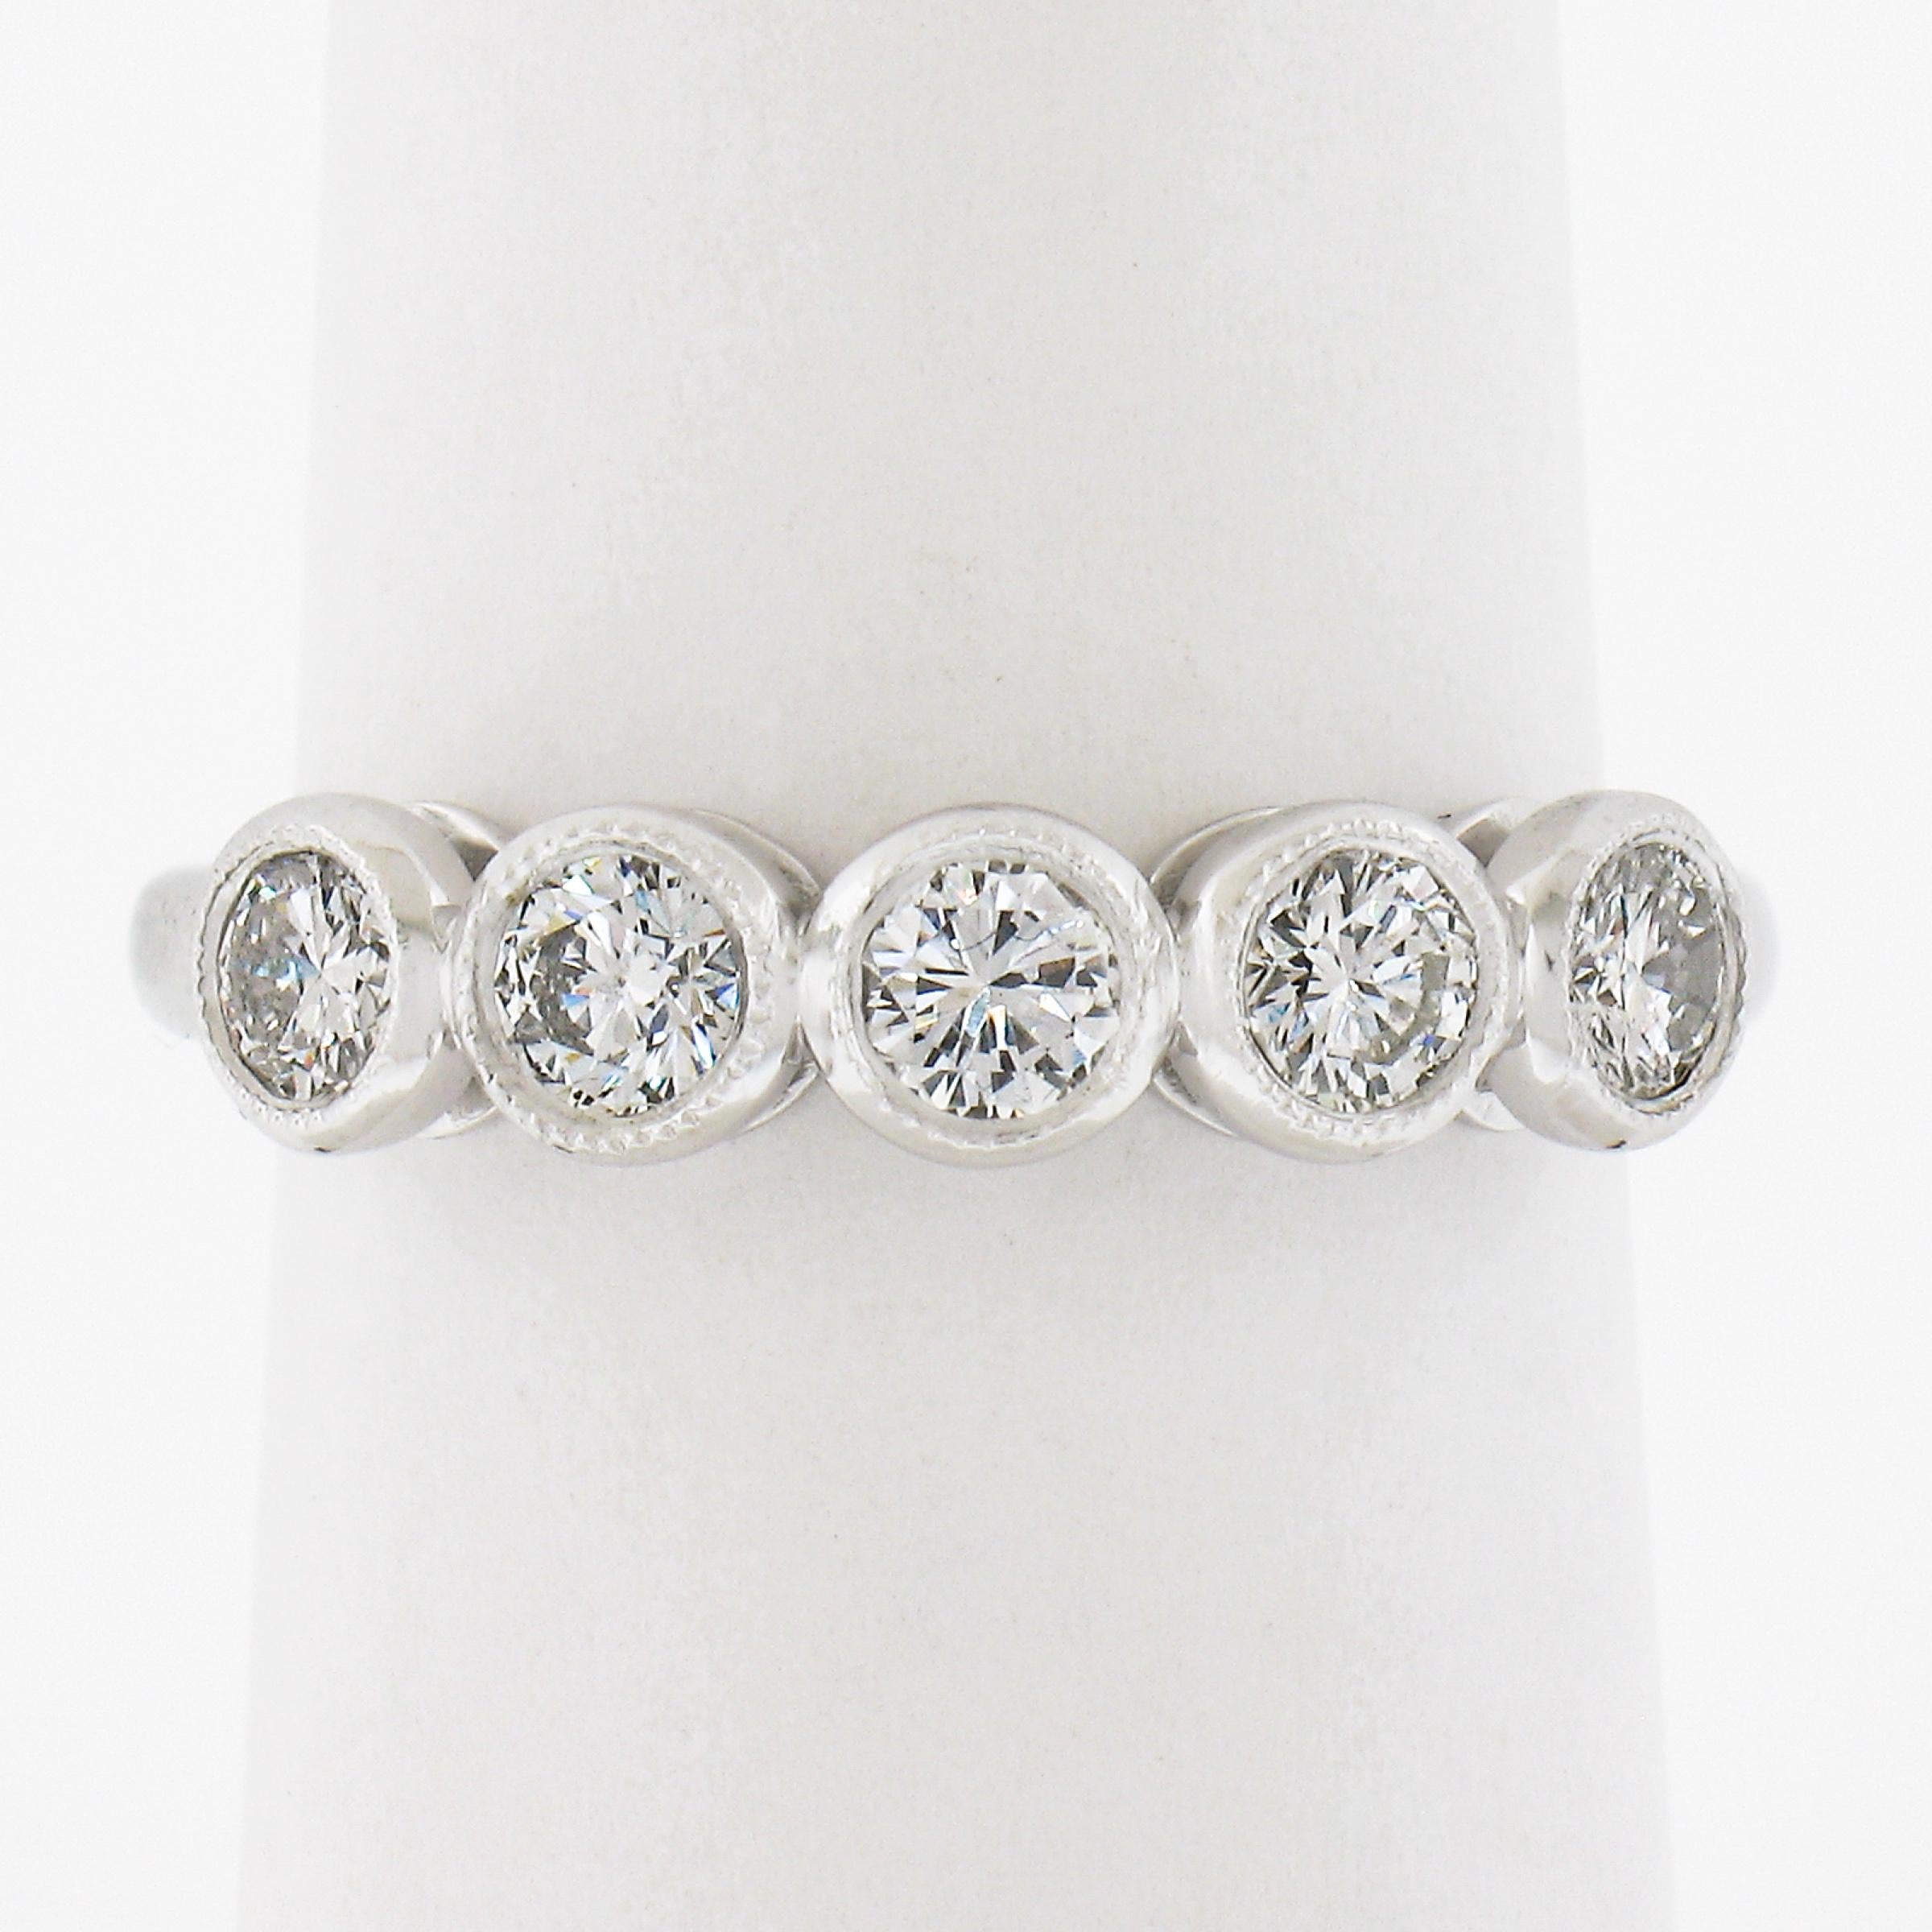 --Stone(s):--
(5) Natural Genuine Diamonds - Round Brilliant Cut - Milgrain Bezel Set - G/H Color - VS2-SI2 Clarity 
Total Carat Weight:	0.68 (exact)

Material: Solid Platinum Gold
Weight: 5.10 Grams
Ring Size: 6.5 (Fitted on a finger. We can custom